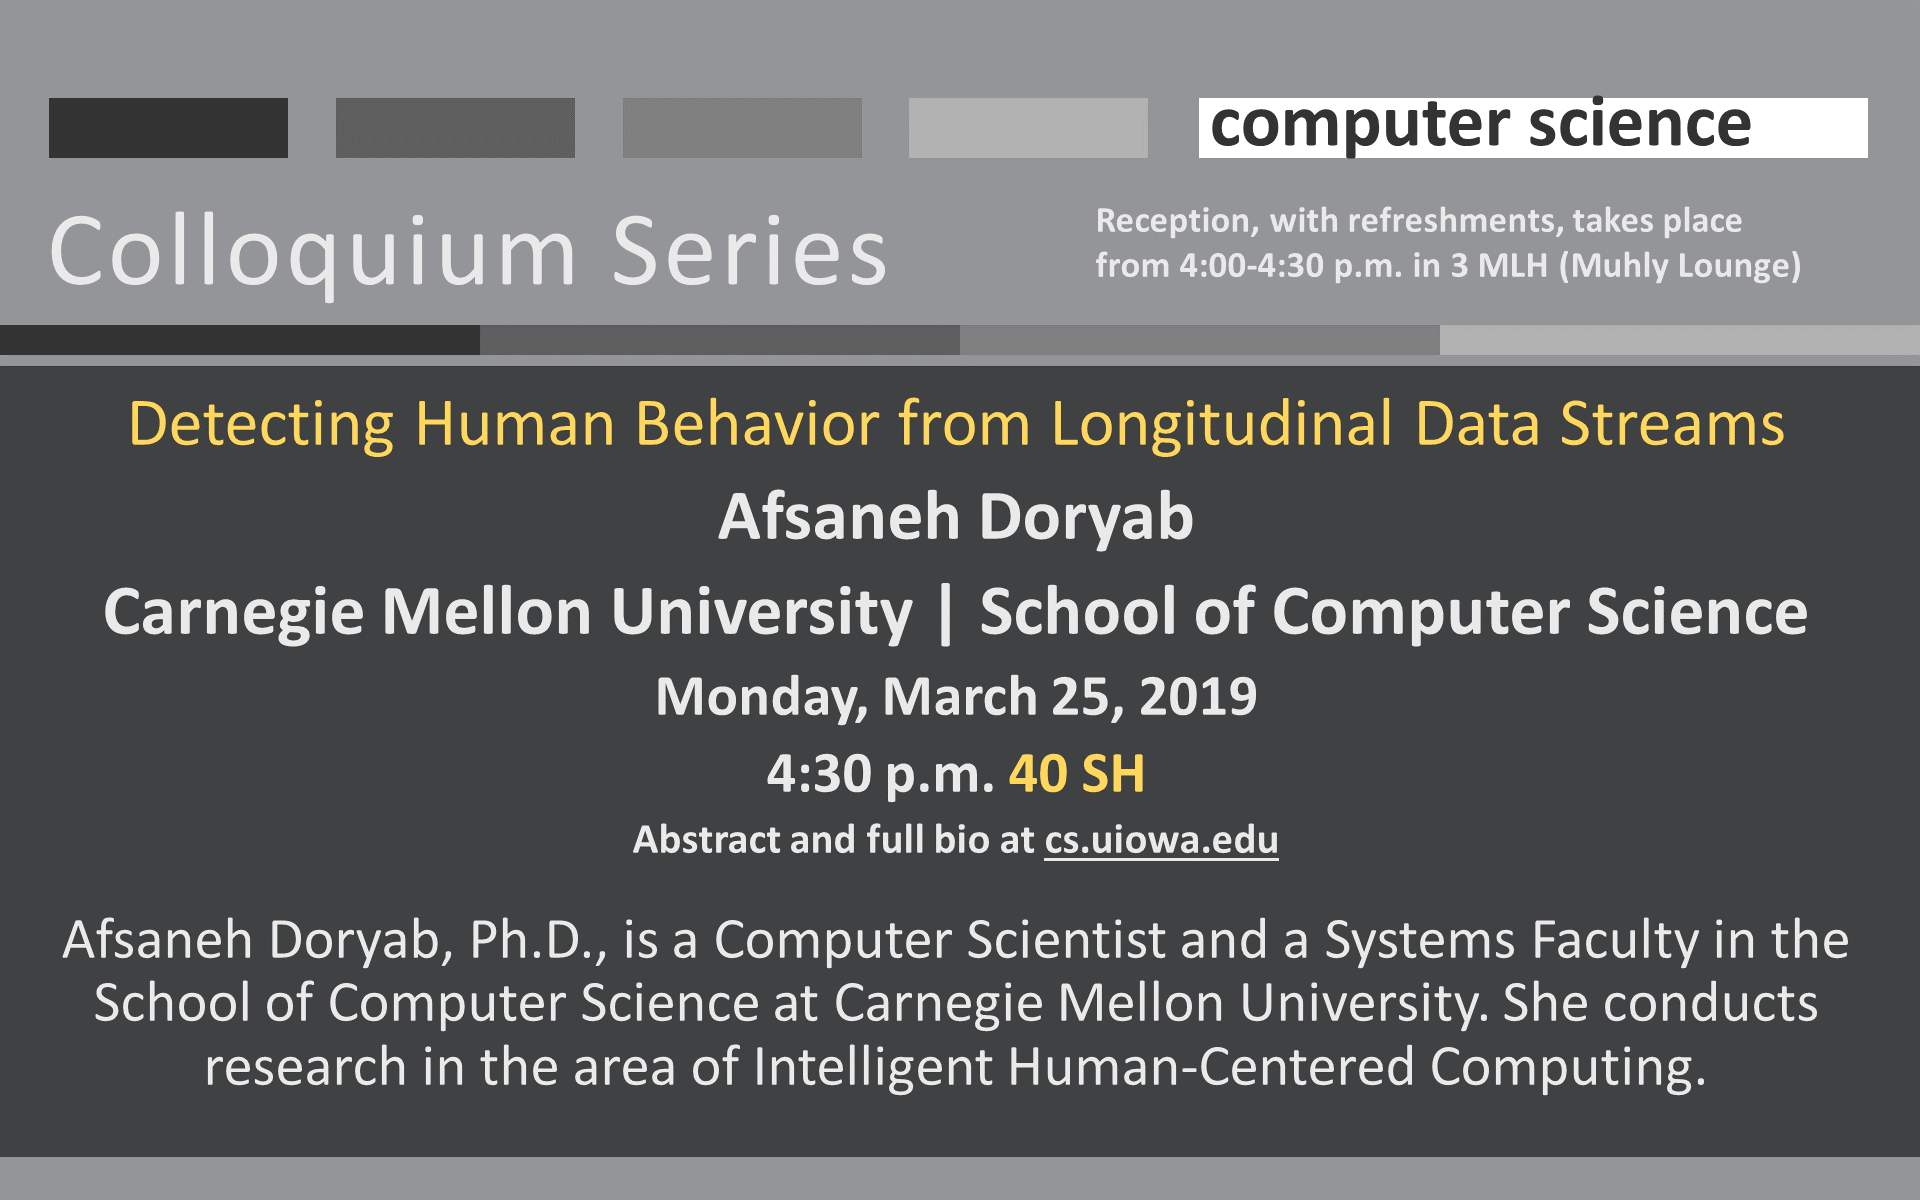 Colloquium Computer Science Detecting Human Behavior from Longitudinal Data Streams Afsaneh Doryab Carnegie Mellon University | School of Computer Science Monday, March 25, 2019 4:30 p.m. 40 SH Abstract and full bio at cs.uiowa.edu  Afsaneh Doryab, Ph.D., is a Computer Scientist and a Systems Faculty in the School of Computer Science at Carnegie Mellon University. She conducts research in the area of Intelligent Human-Centered Computing. Reception, with refreshments, takes place from 4:00-4:30 p.m. in 3 MLH (Muhly Lounge)